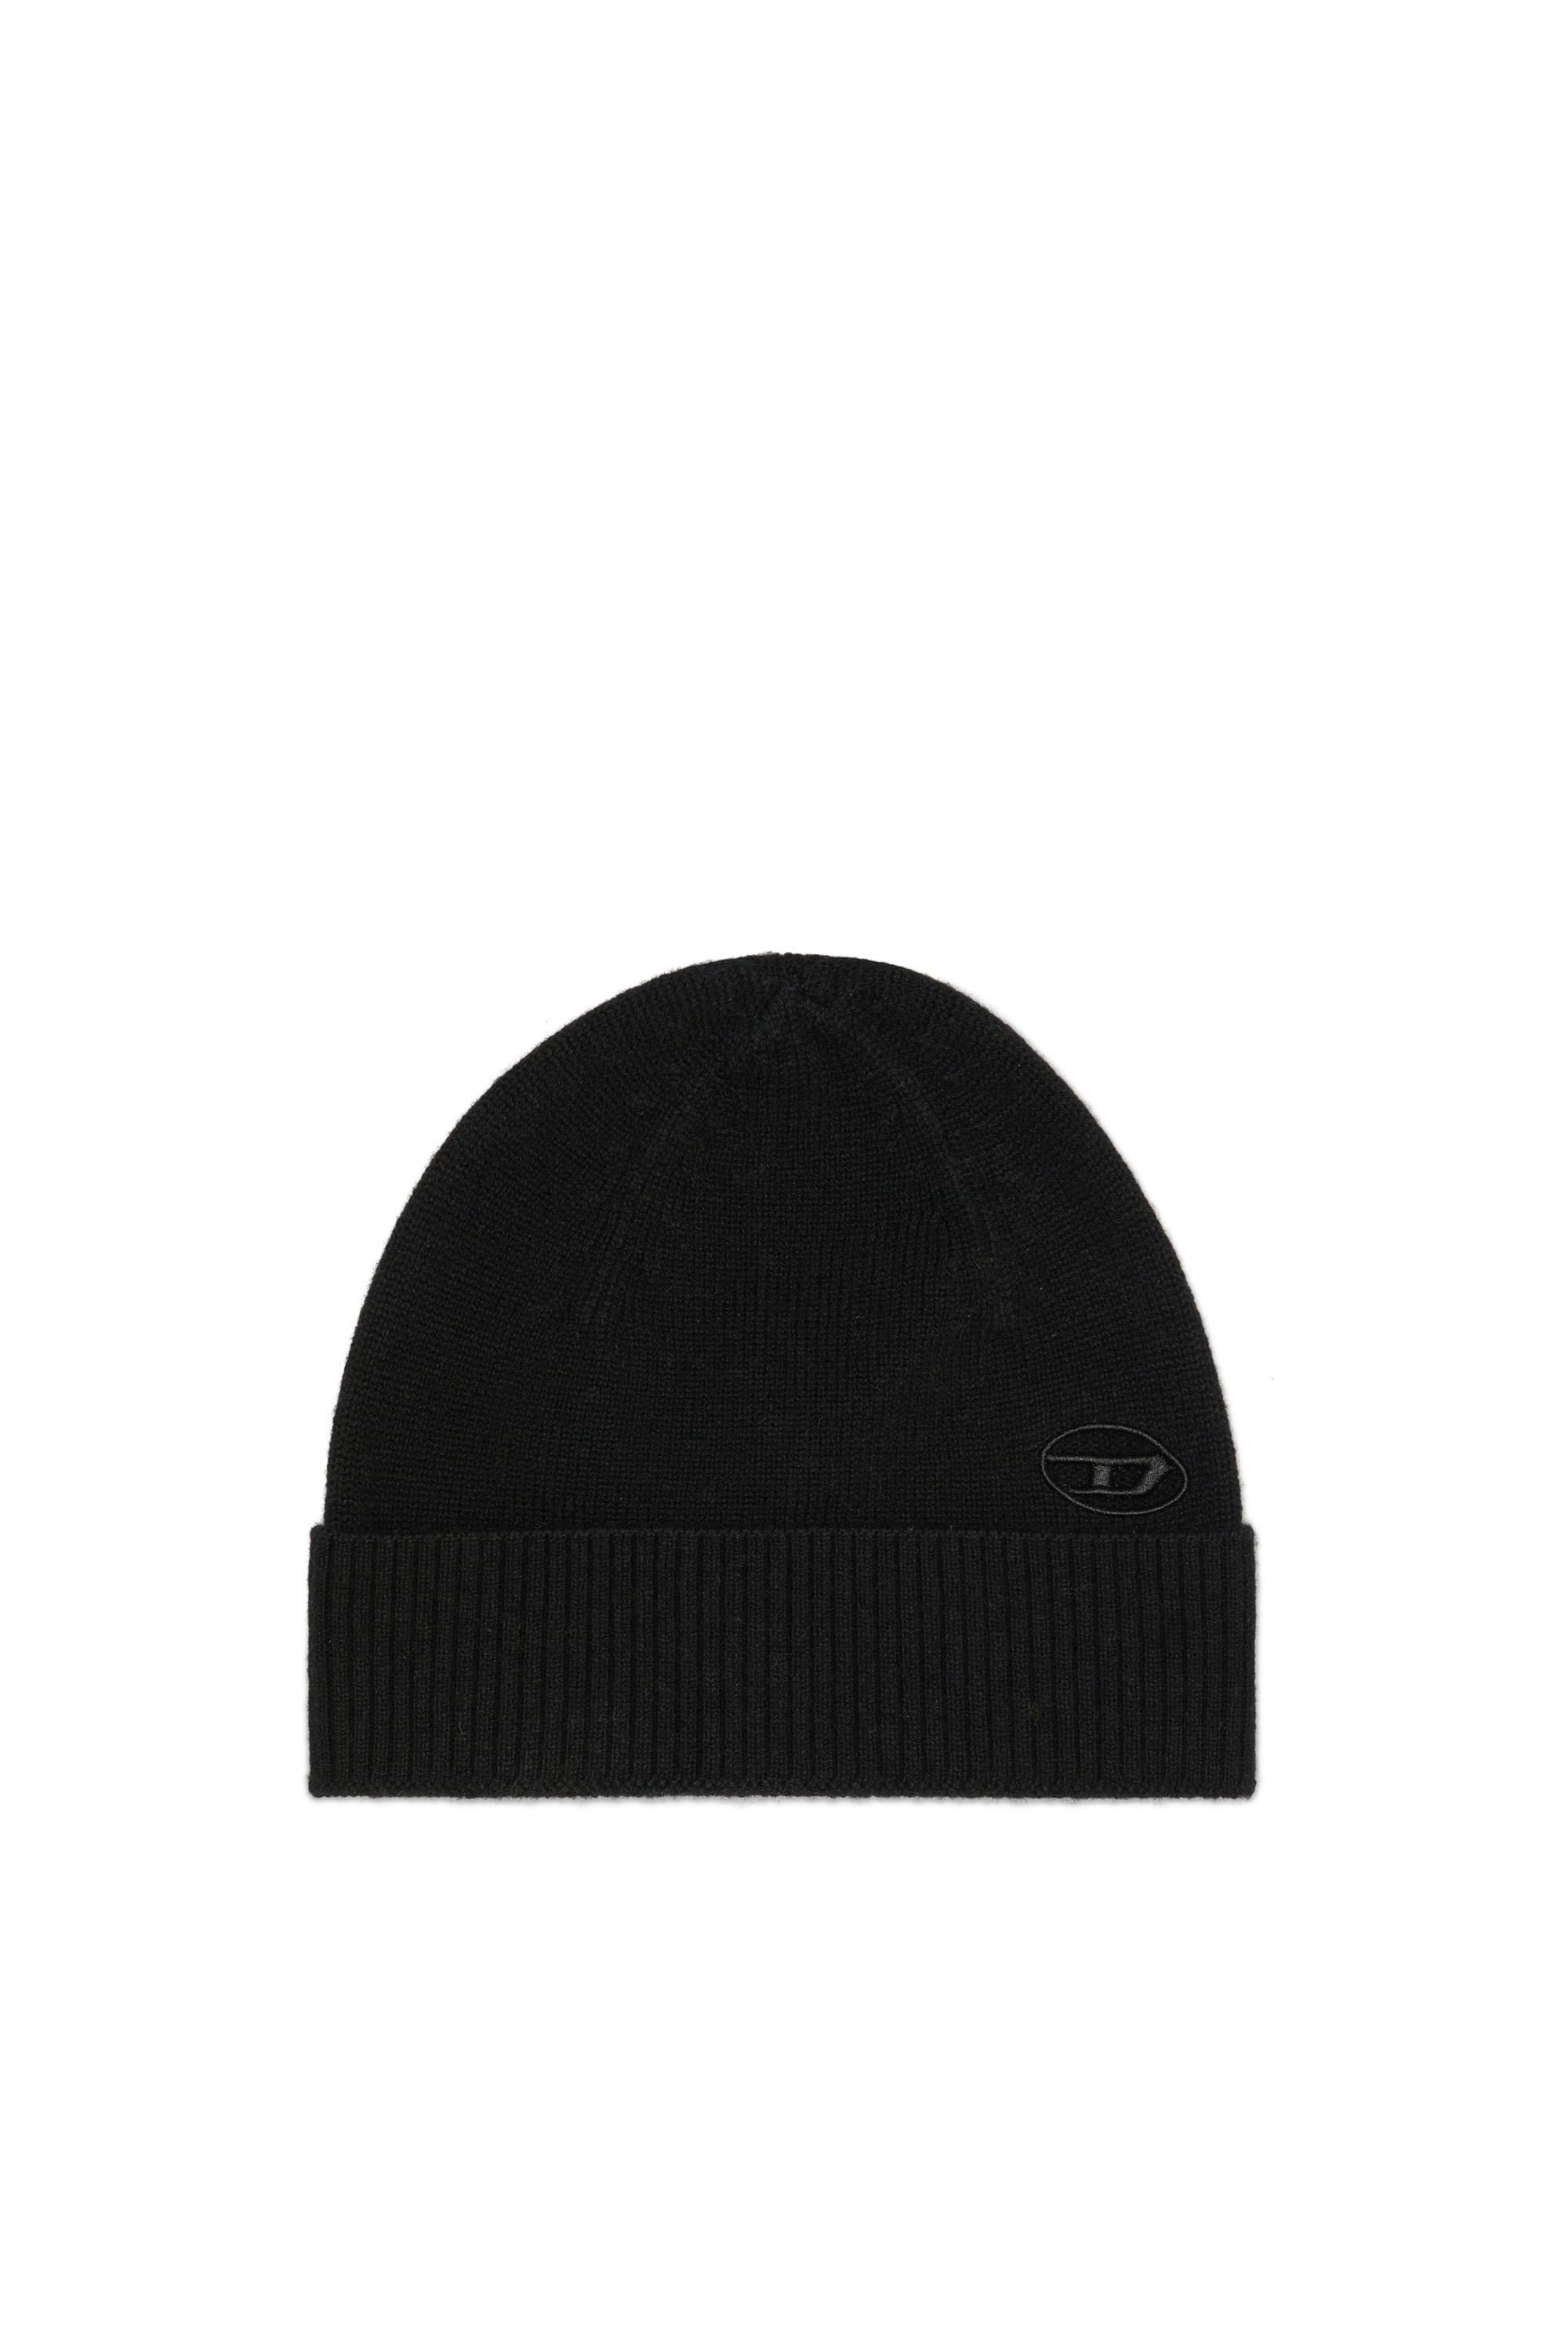 Diesel Beanie With Embroidered Oval D Patch In Black